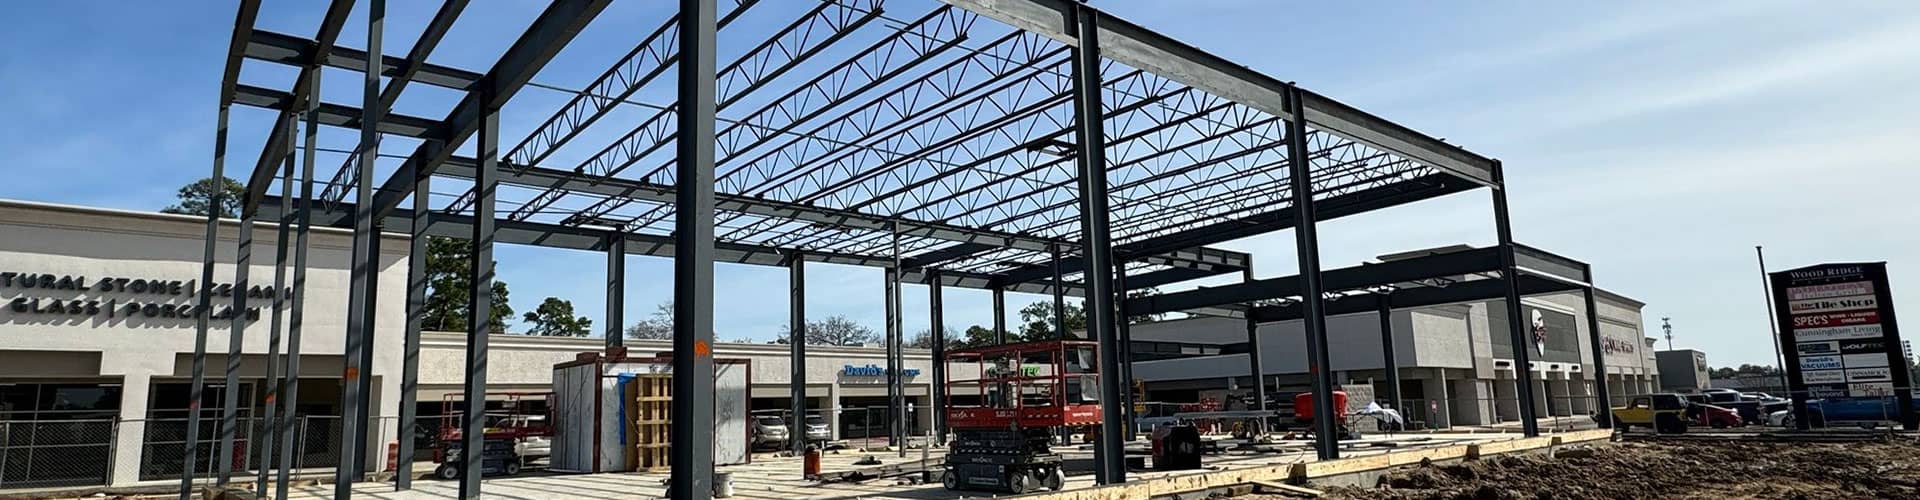 Building under construction by Renovo construction showing the slab and the framing in an open air mall